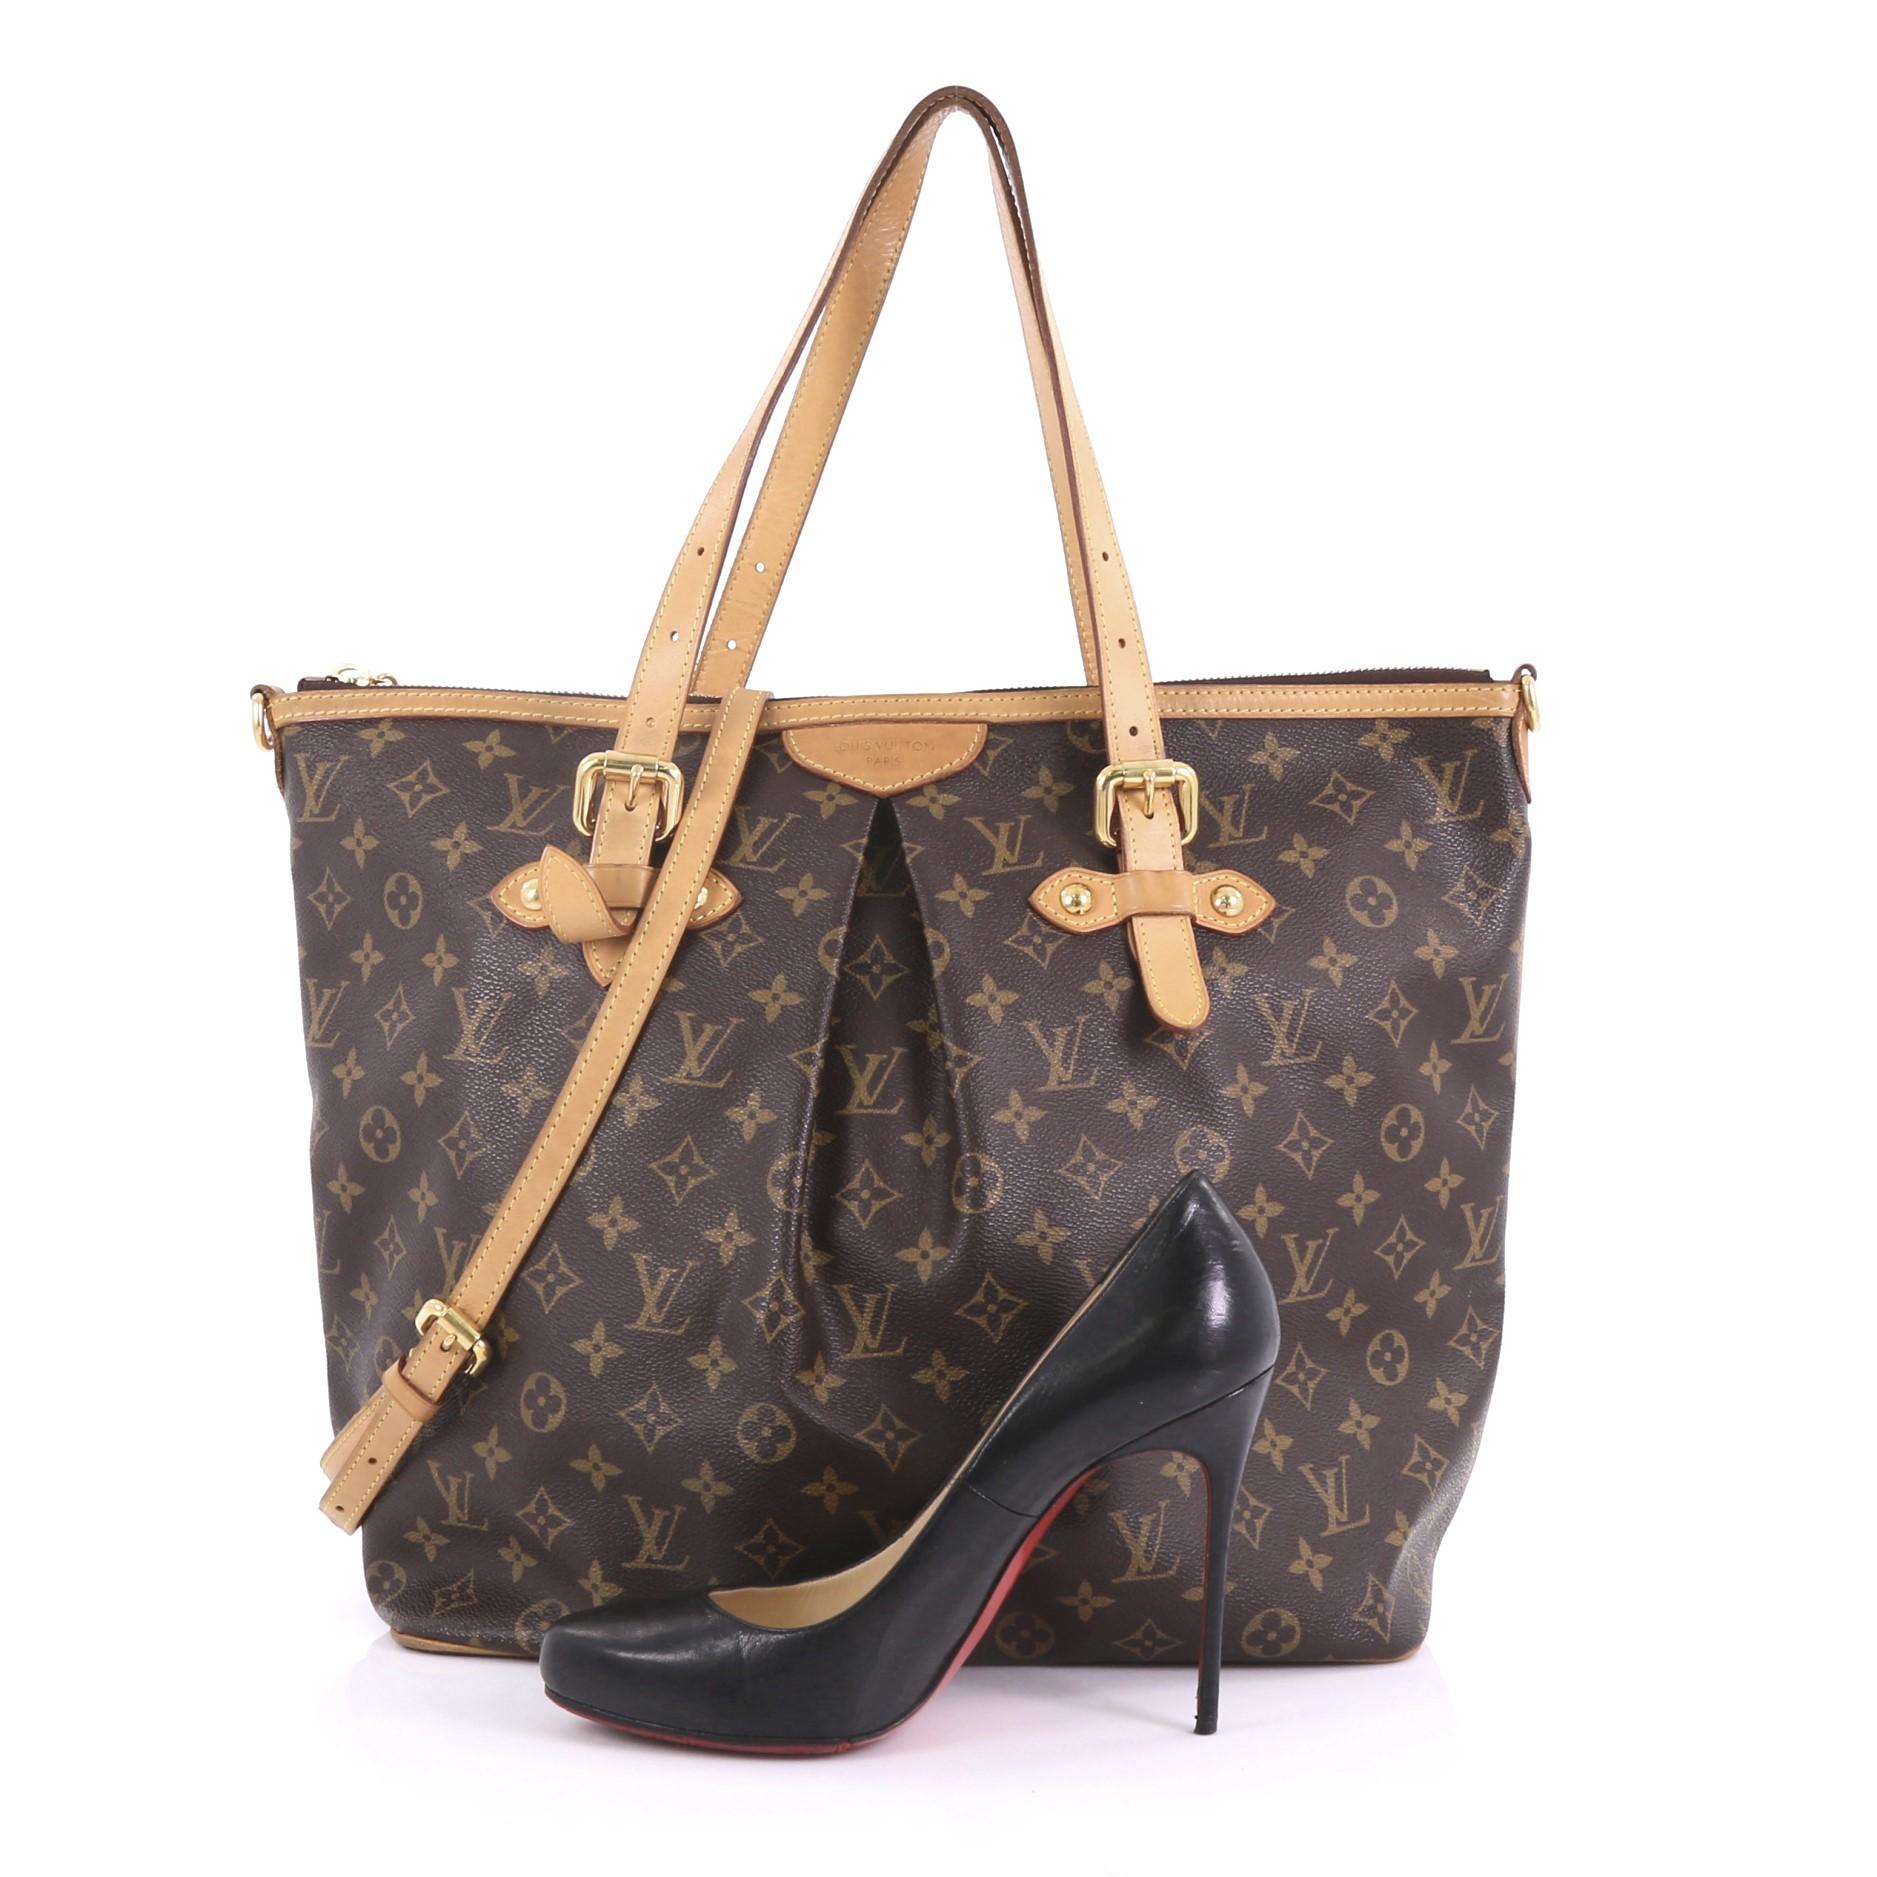 This Louis Vuitton Palermo Handbag Monogram Canvas GM, crafted from brown monogram coated canvas with vachetta leather trim, features dual flat leather handles, pleated silhouette, and gold-tone hardware. Its zip closure opens to a brown fabric